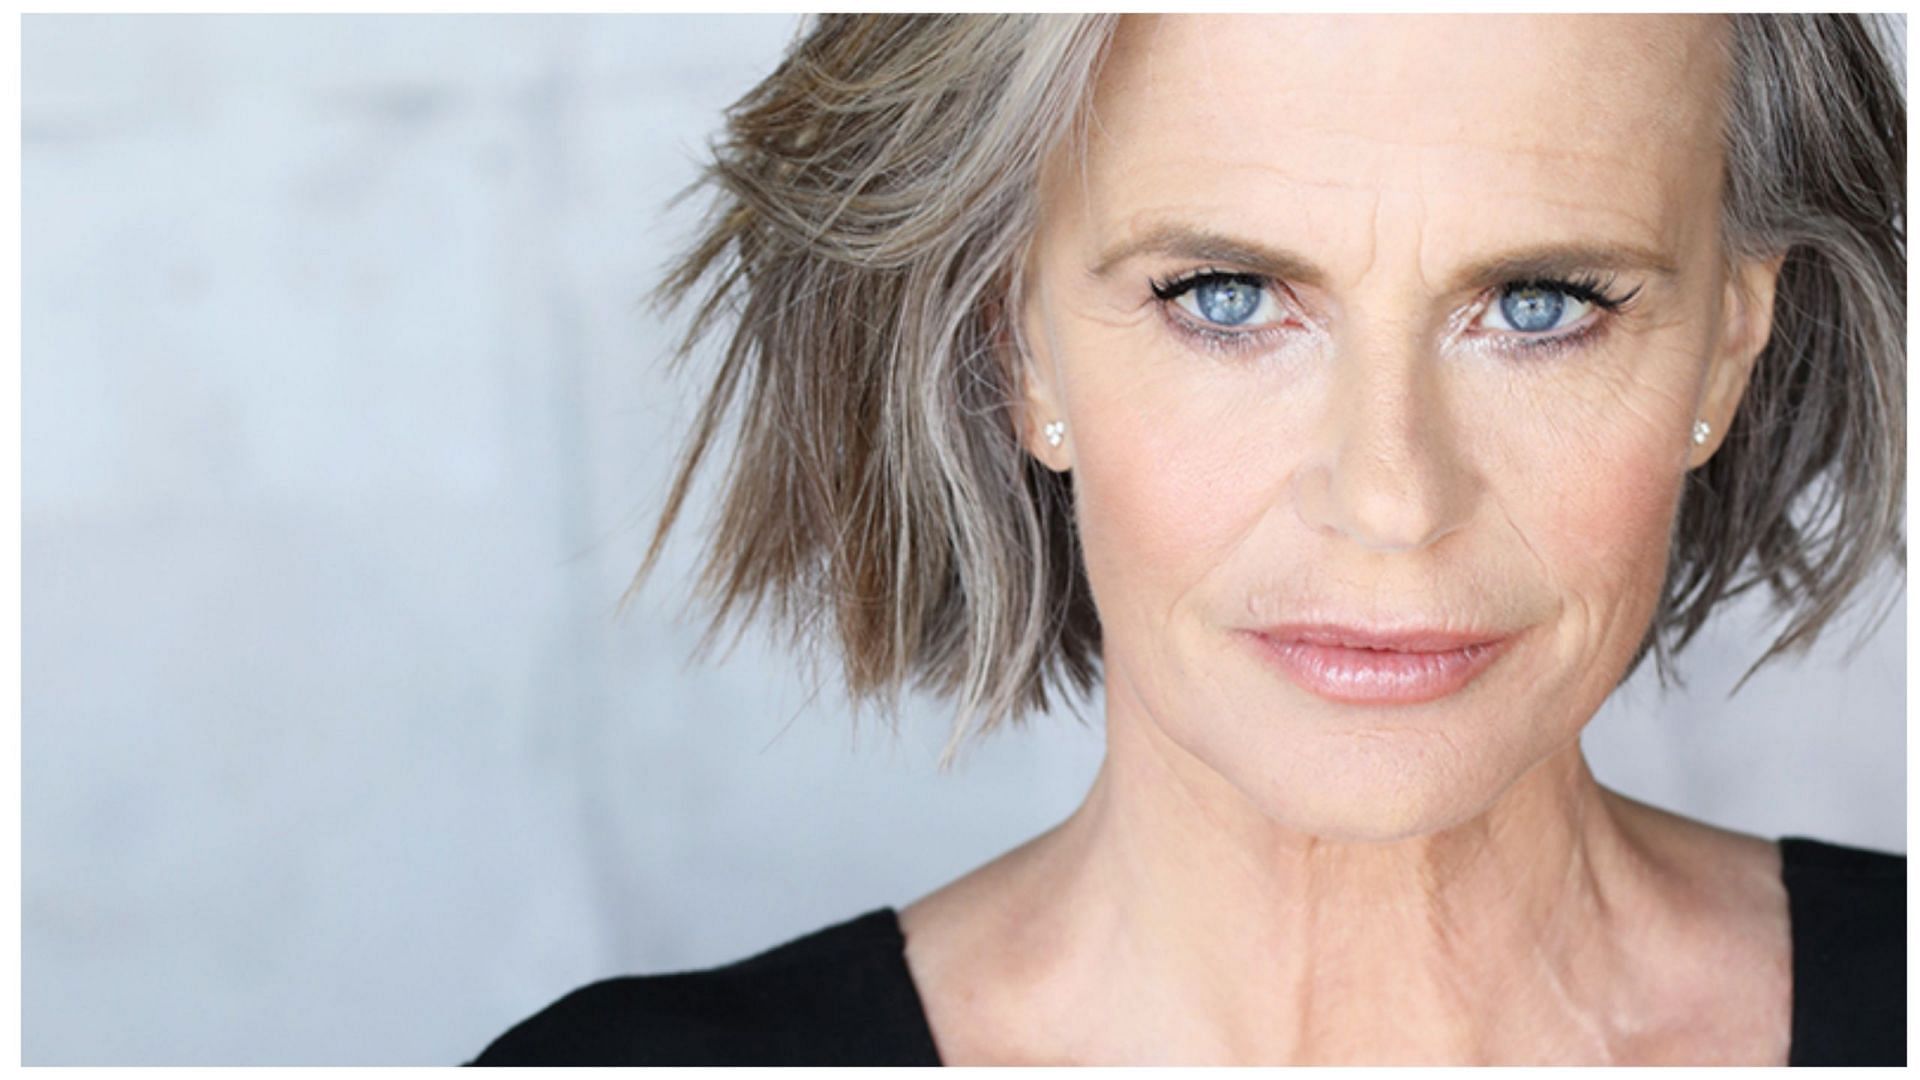 Serena Scott Thomas arrives on the &quot;Days of Our Lives&quot; set, ready to stir up some mystery. (Image via IMDB)